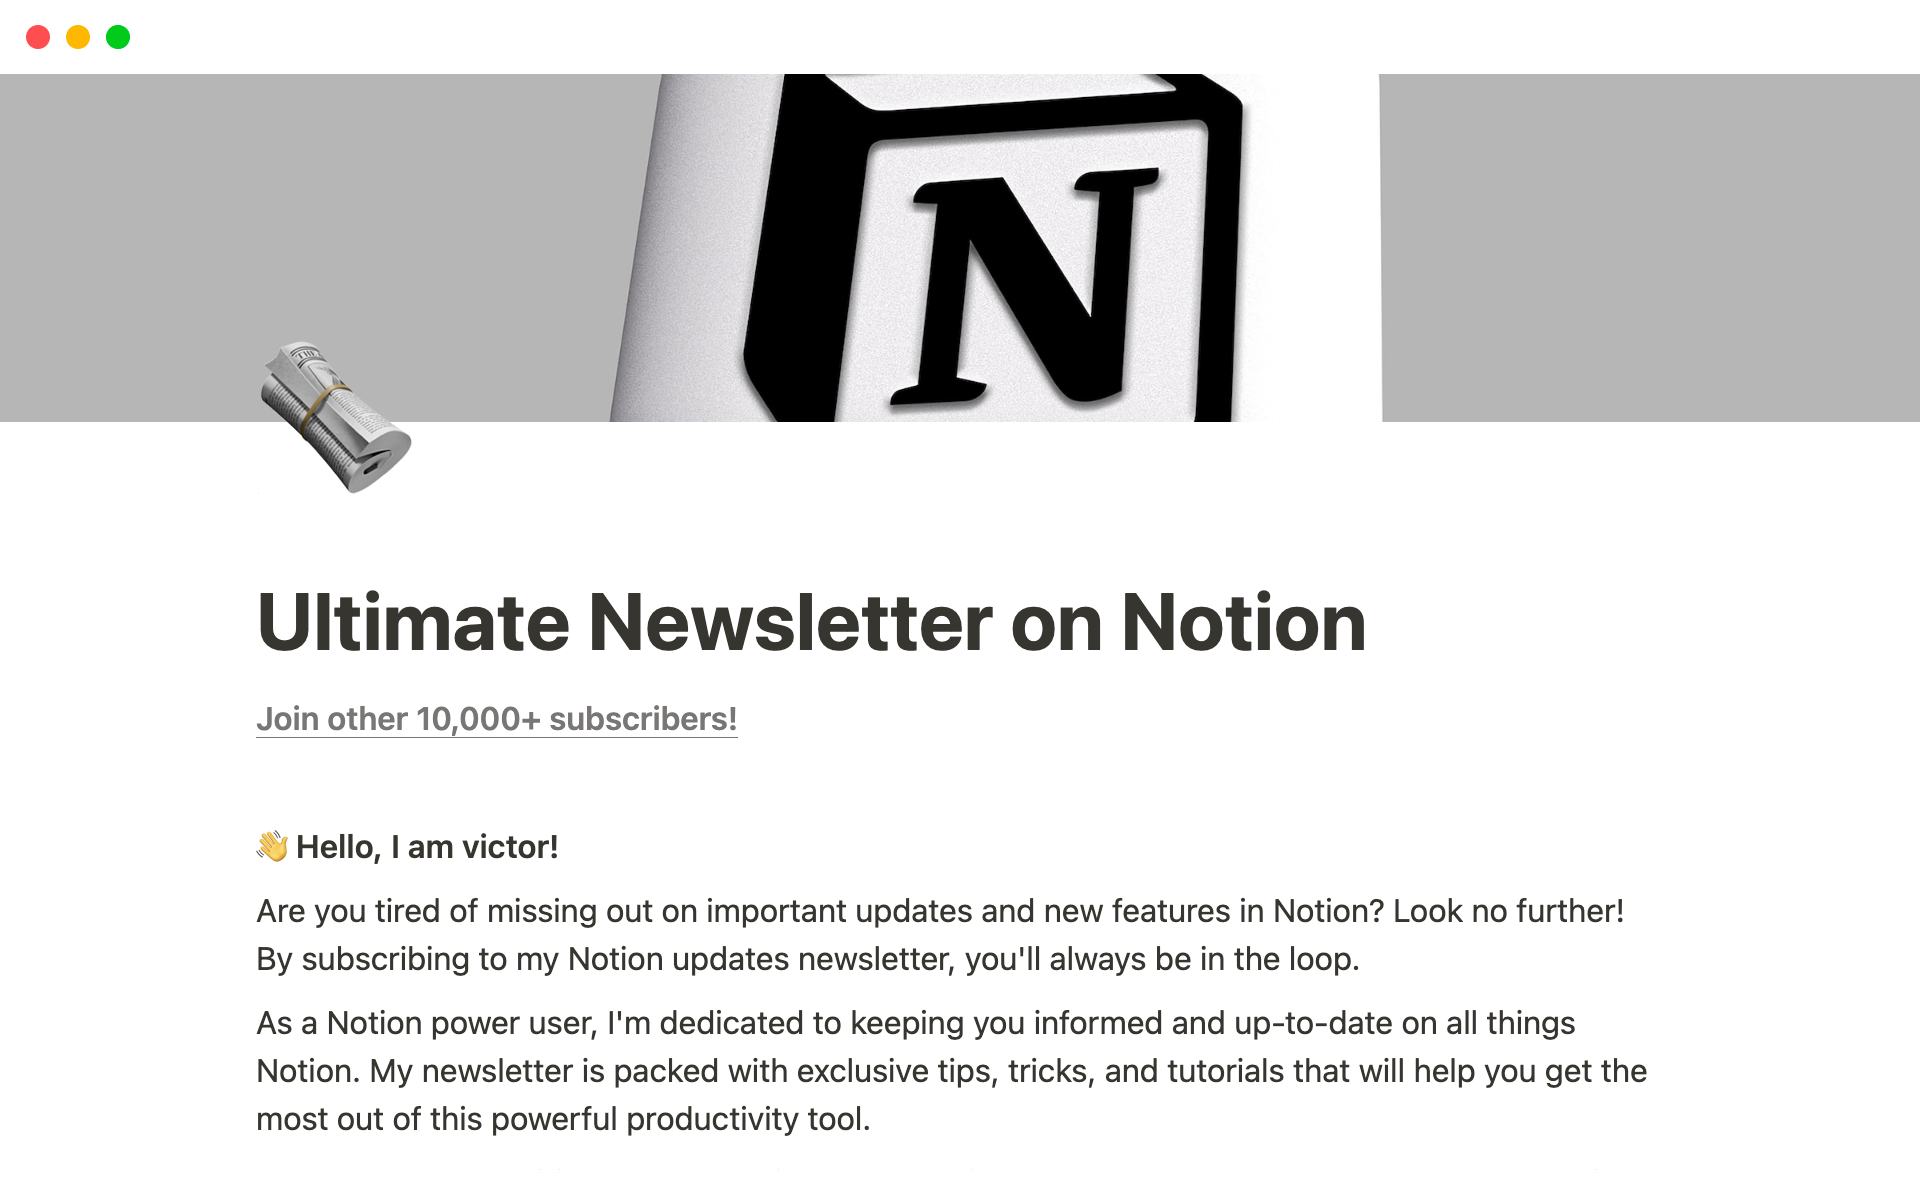 To run a newsletter on Notion.